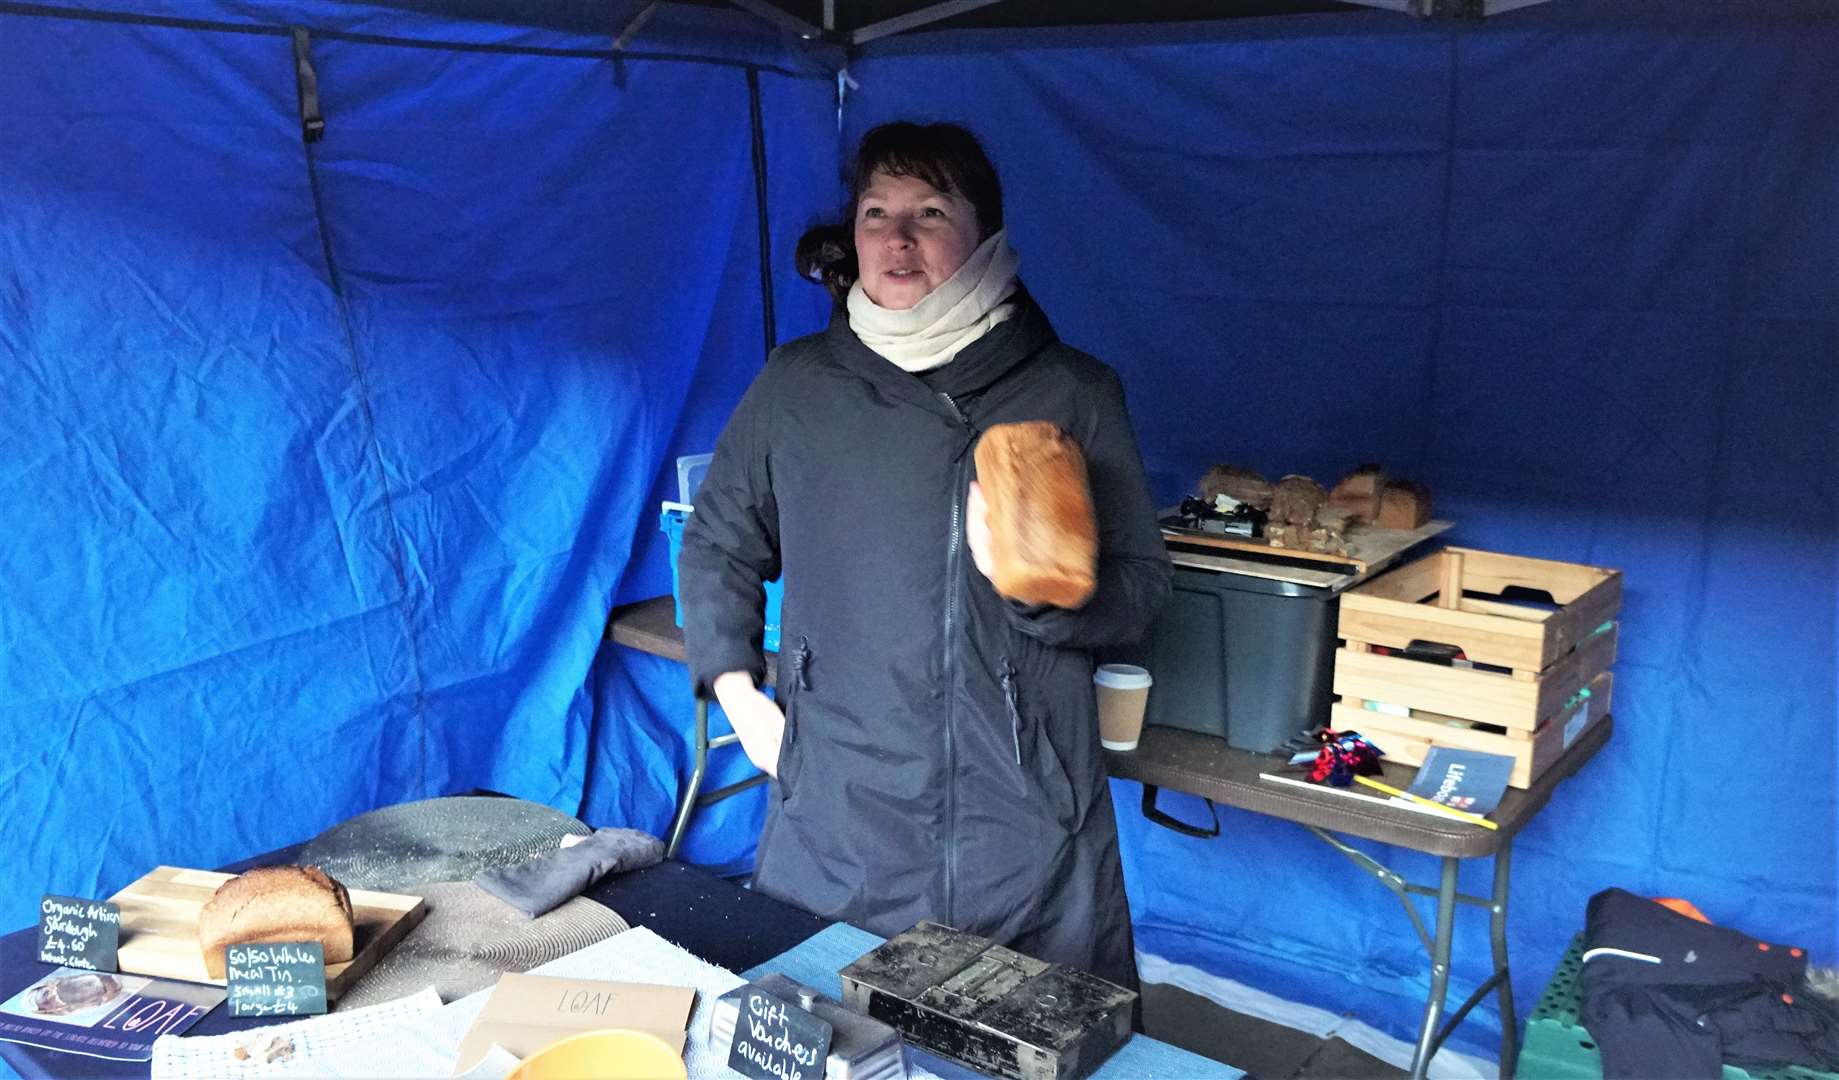 Artisan bread was the flavour of the day from this company called Loaves which is based at Strath Halladale. Susan Wallace says she likes using heritage and organic grains in her products which had sold out on the day. Picture: DGS